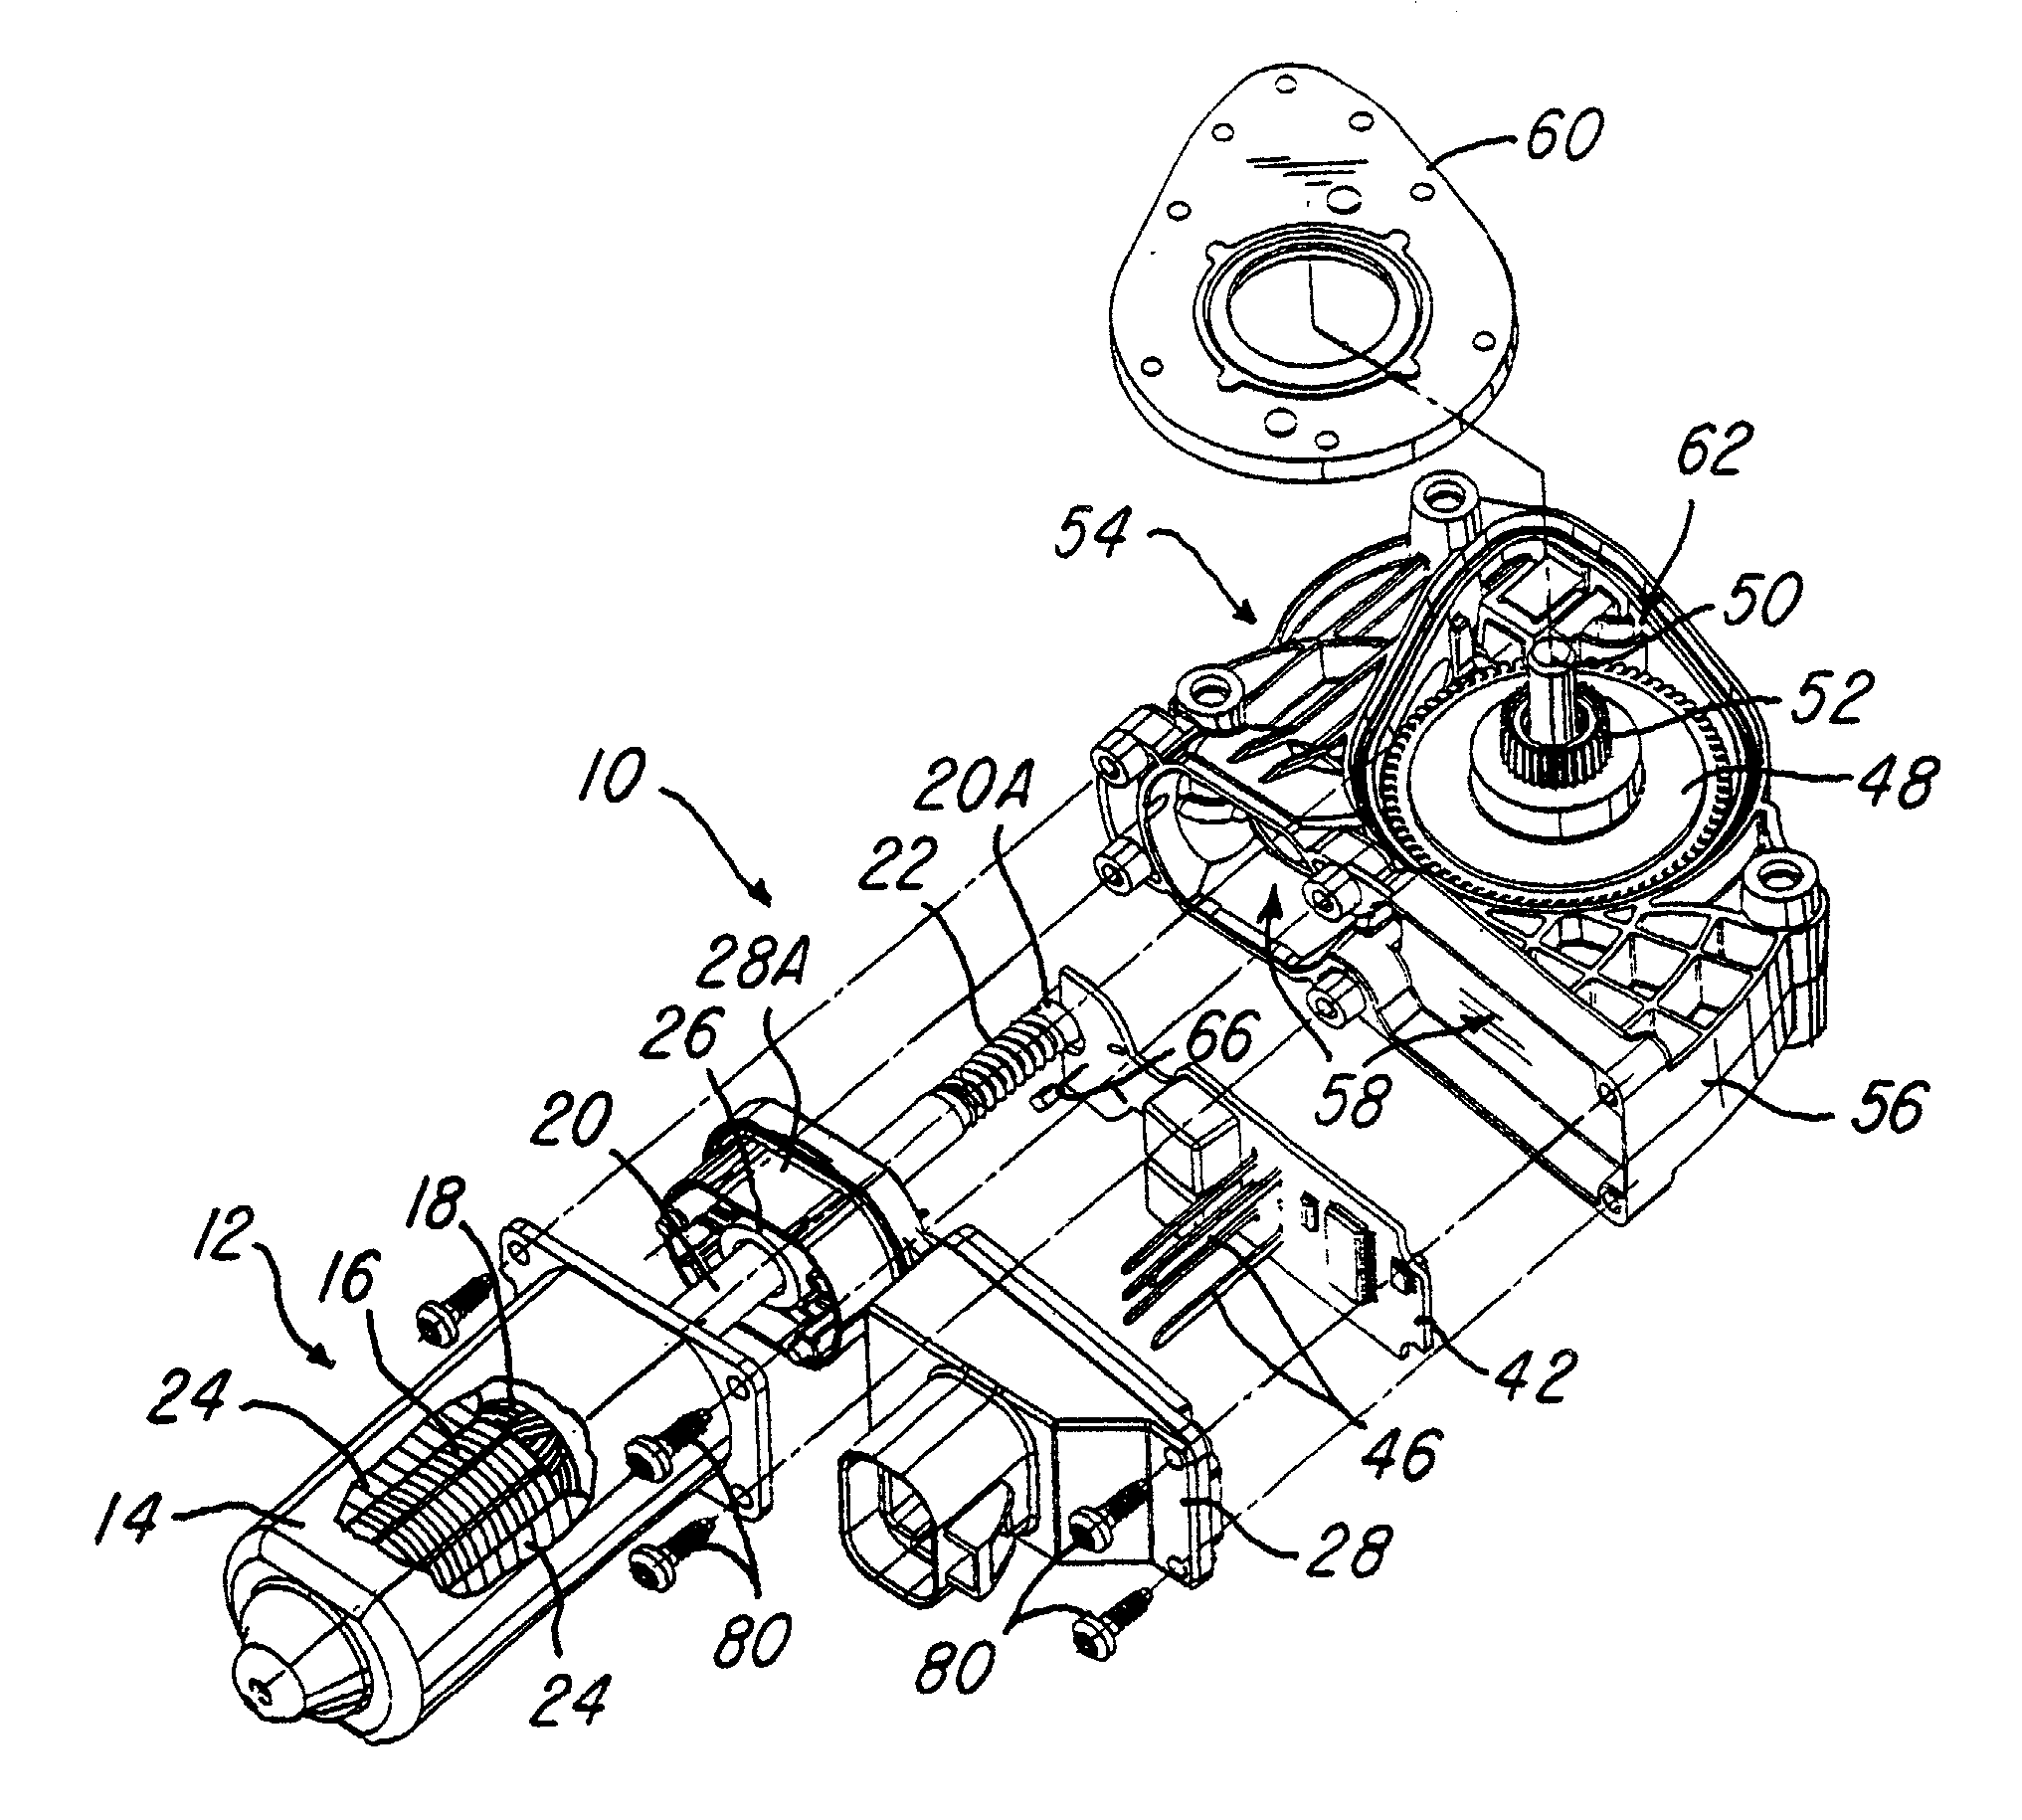 Electric motor drive system and method